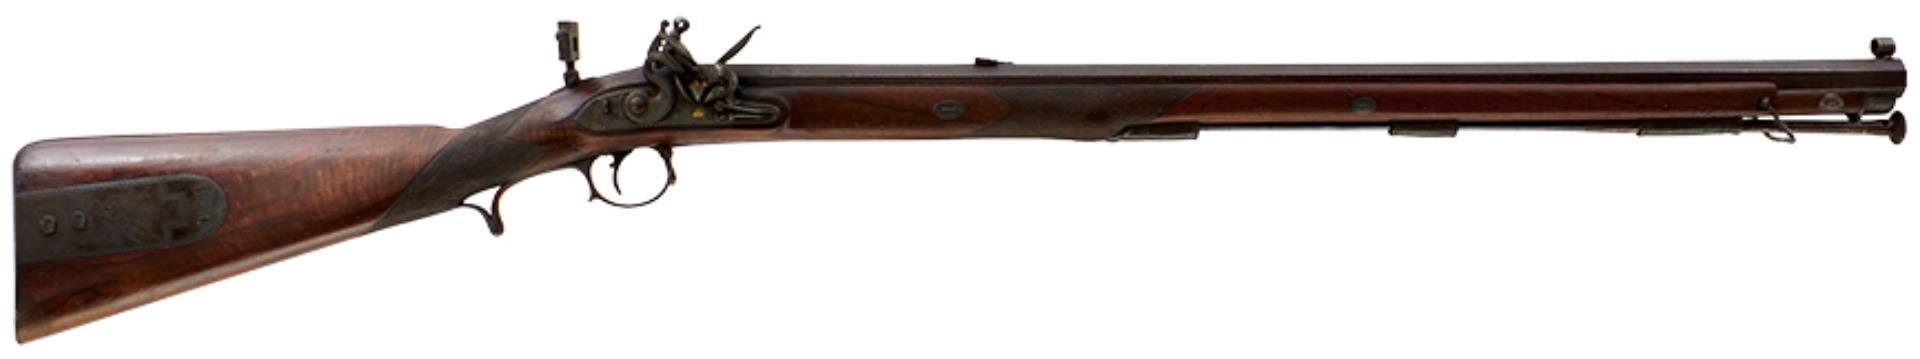 A SCARCE 15-BORE FLINTLOCK TARGET RIFLE BY BRANDER & POTTS, 30.25inch sighted damascus barrel fitted